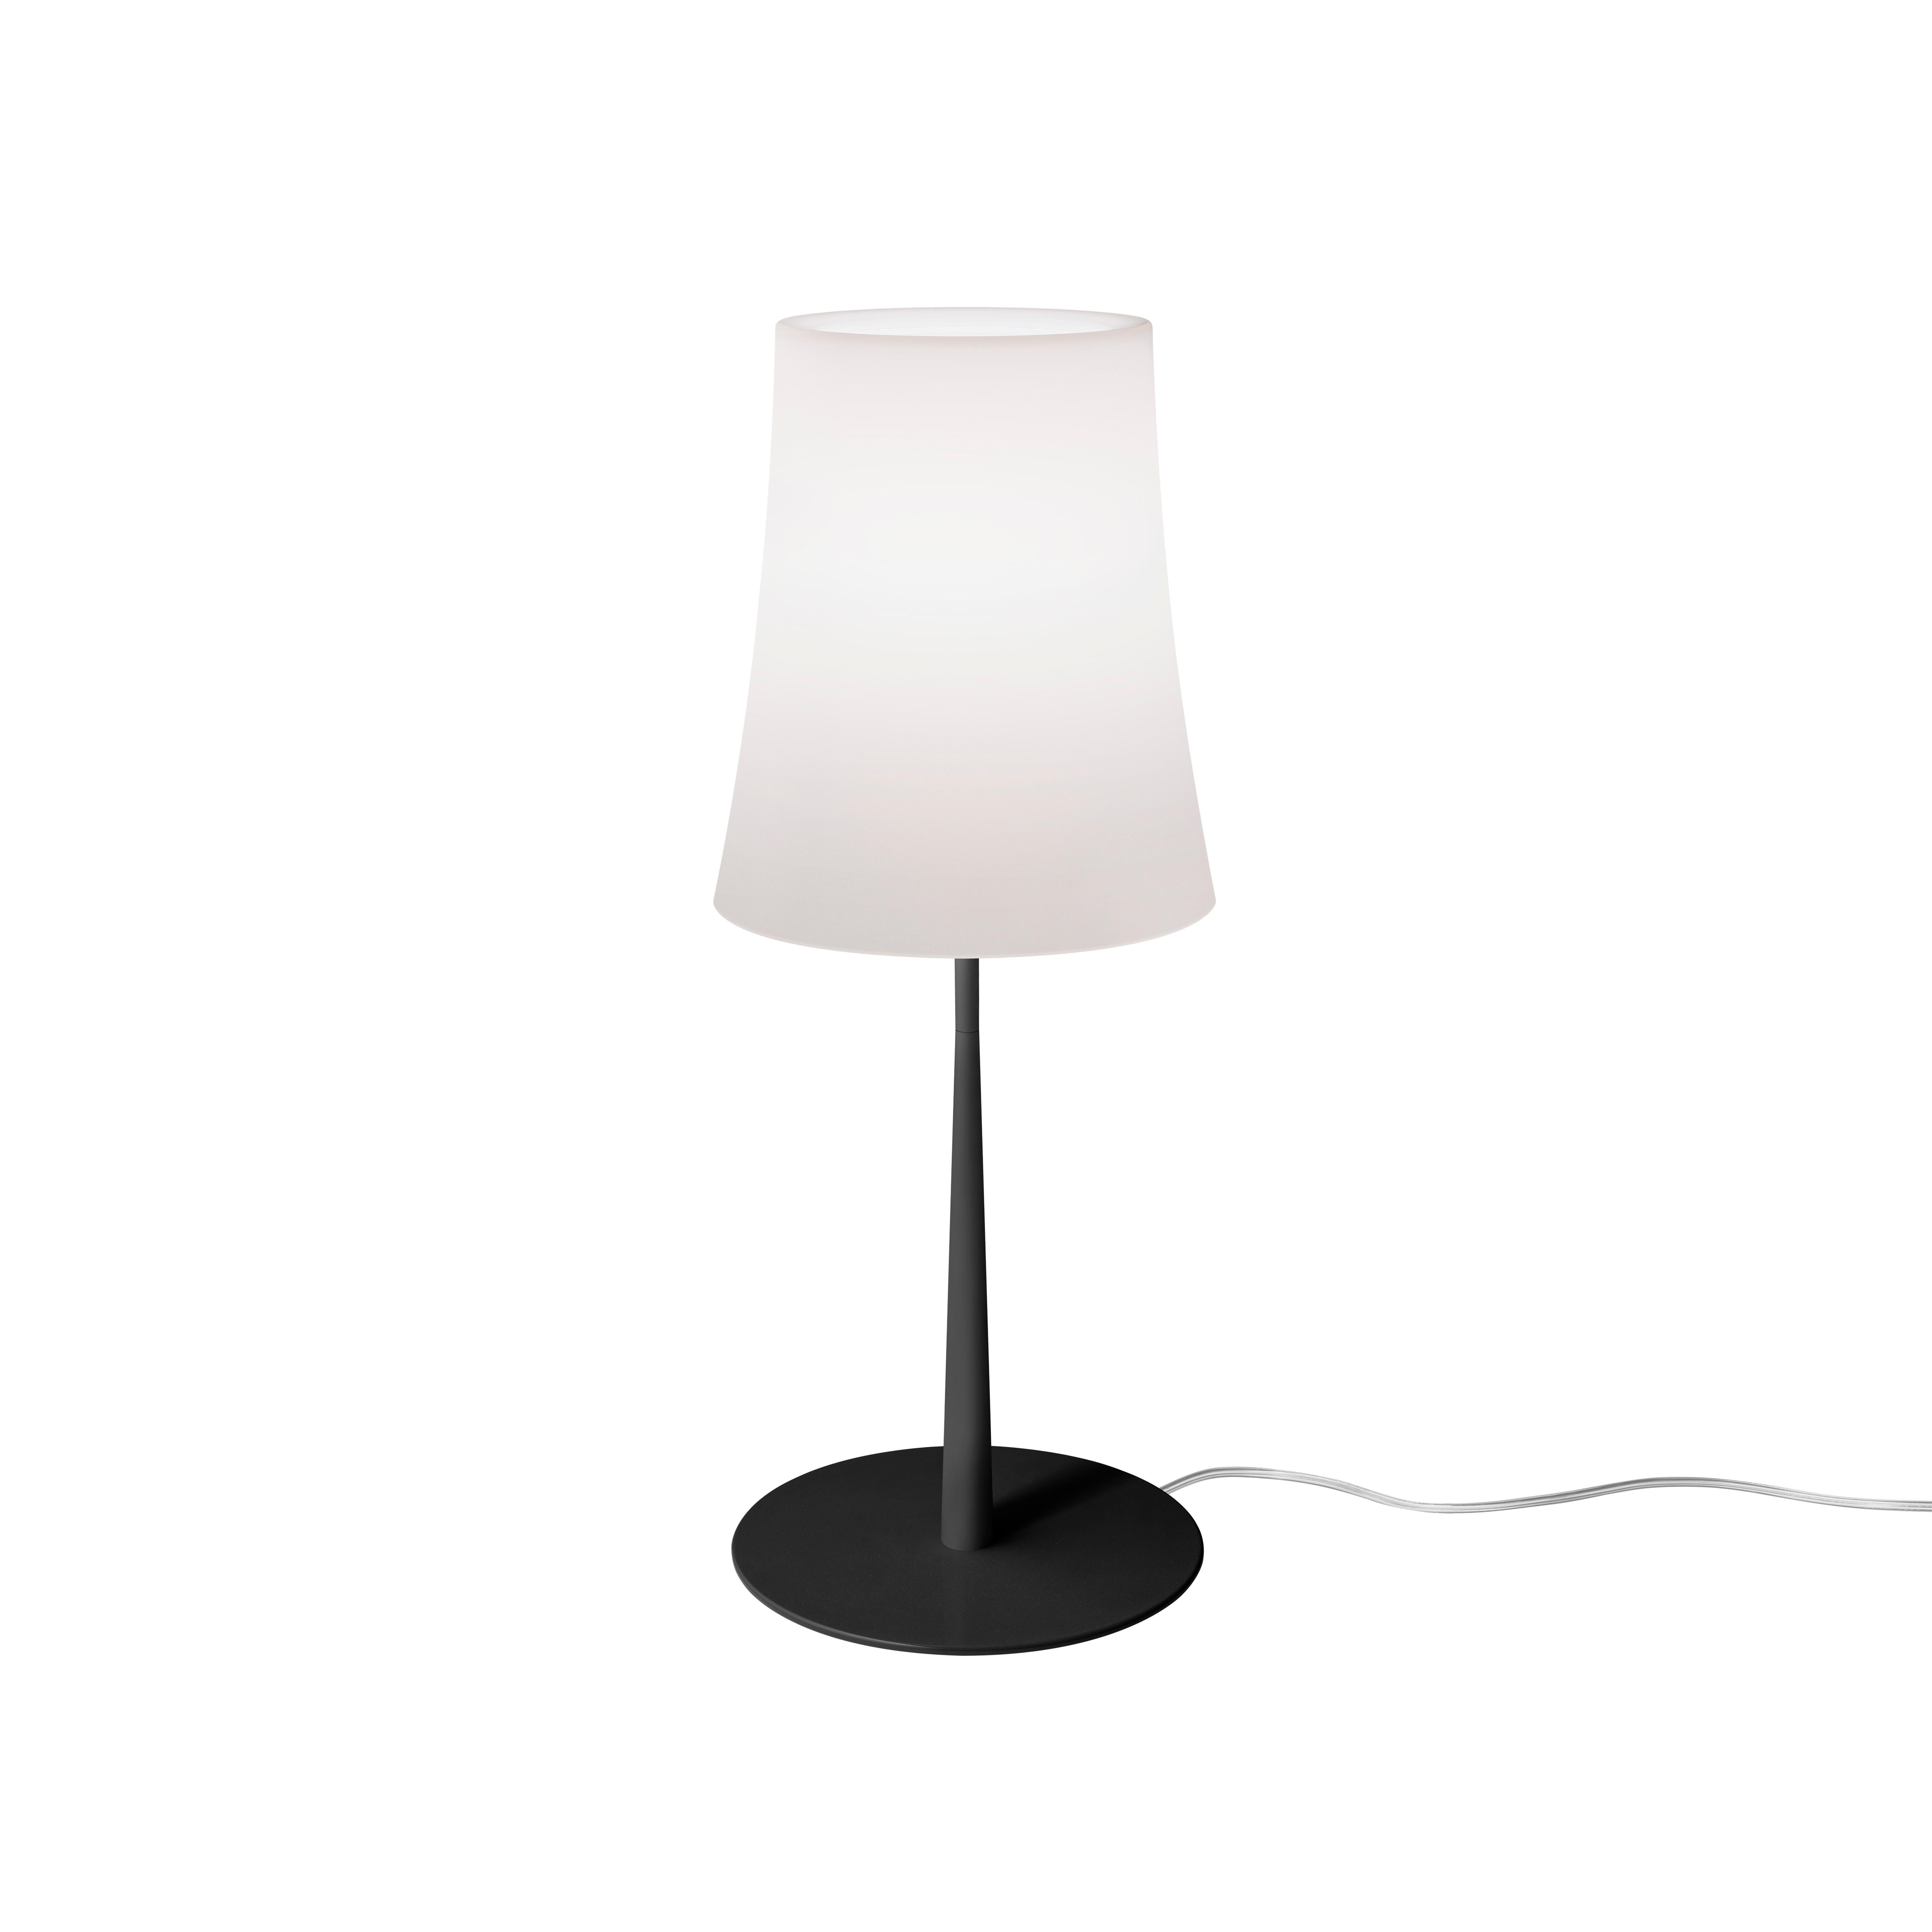 Birdie’s poetic design gains in essentiality becoming more accessible and extraordinarily versatile.

Table lamp with diffused light. Die cast zinc alloy base and steel rod, both liquid coated. Opaline injection molded polycarbonate internal